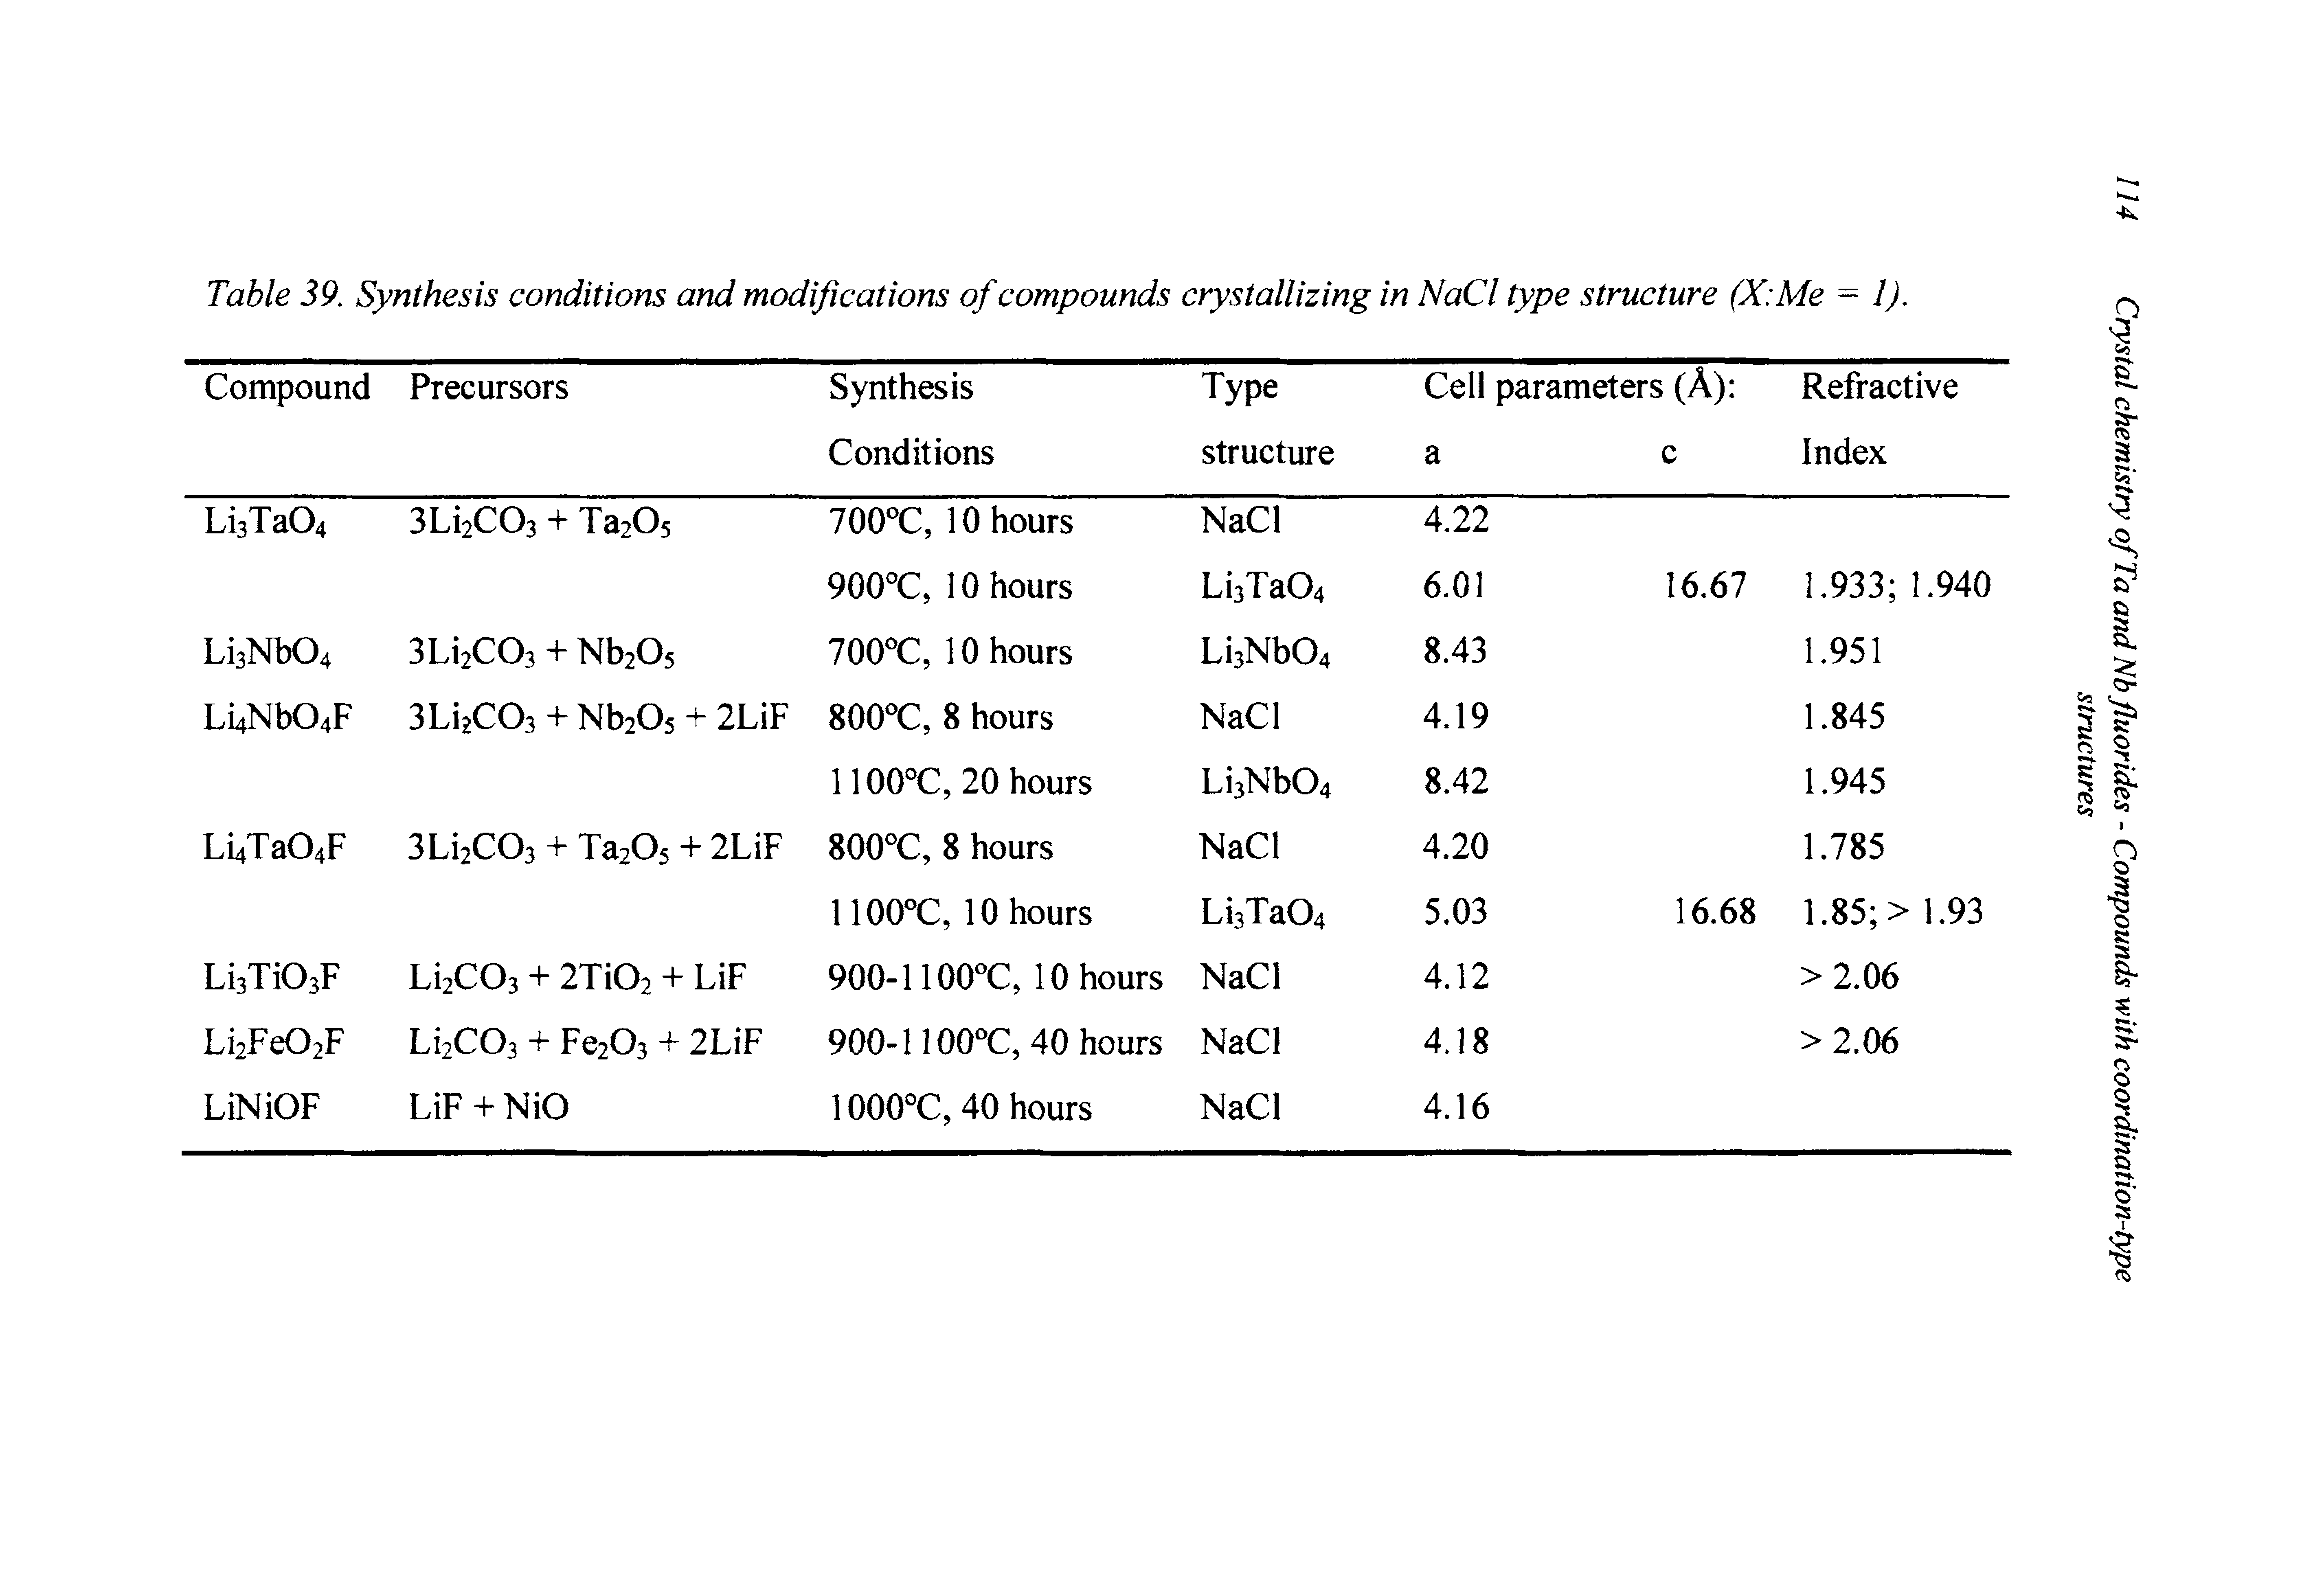 Table 39. Synthesis conditions and modifications of compounds crystallizing in NaCl type structure (X Me = l).